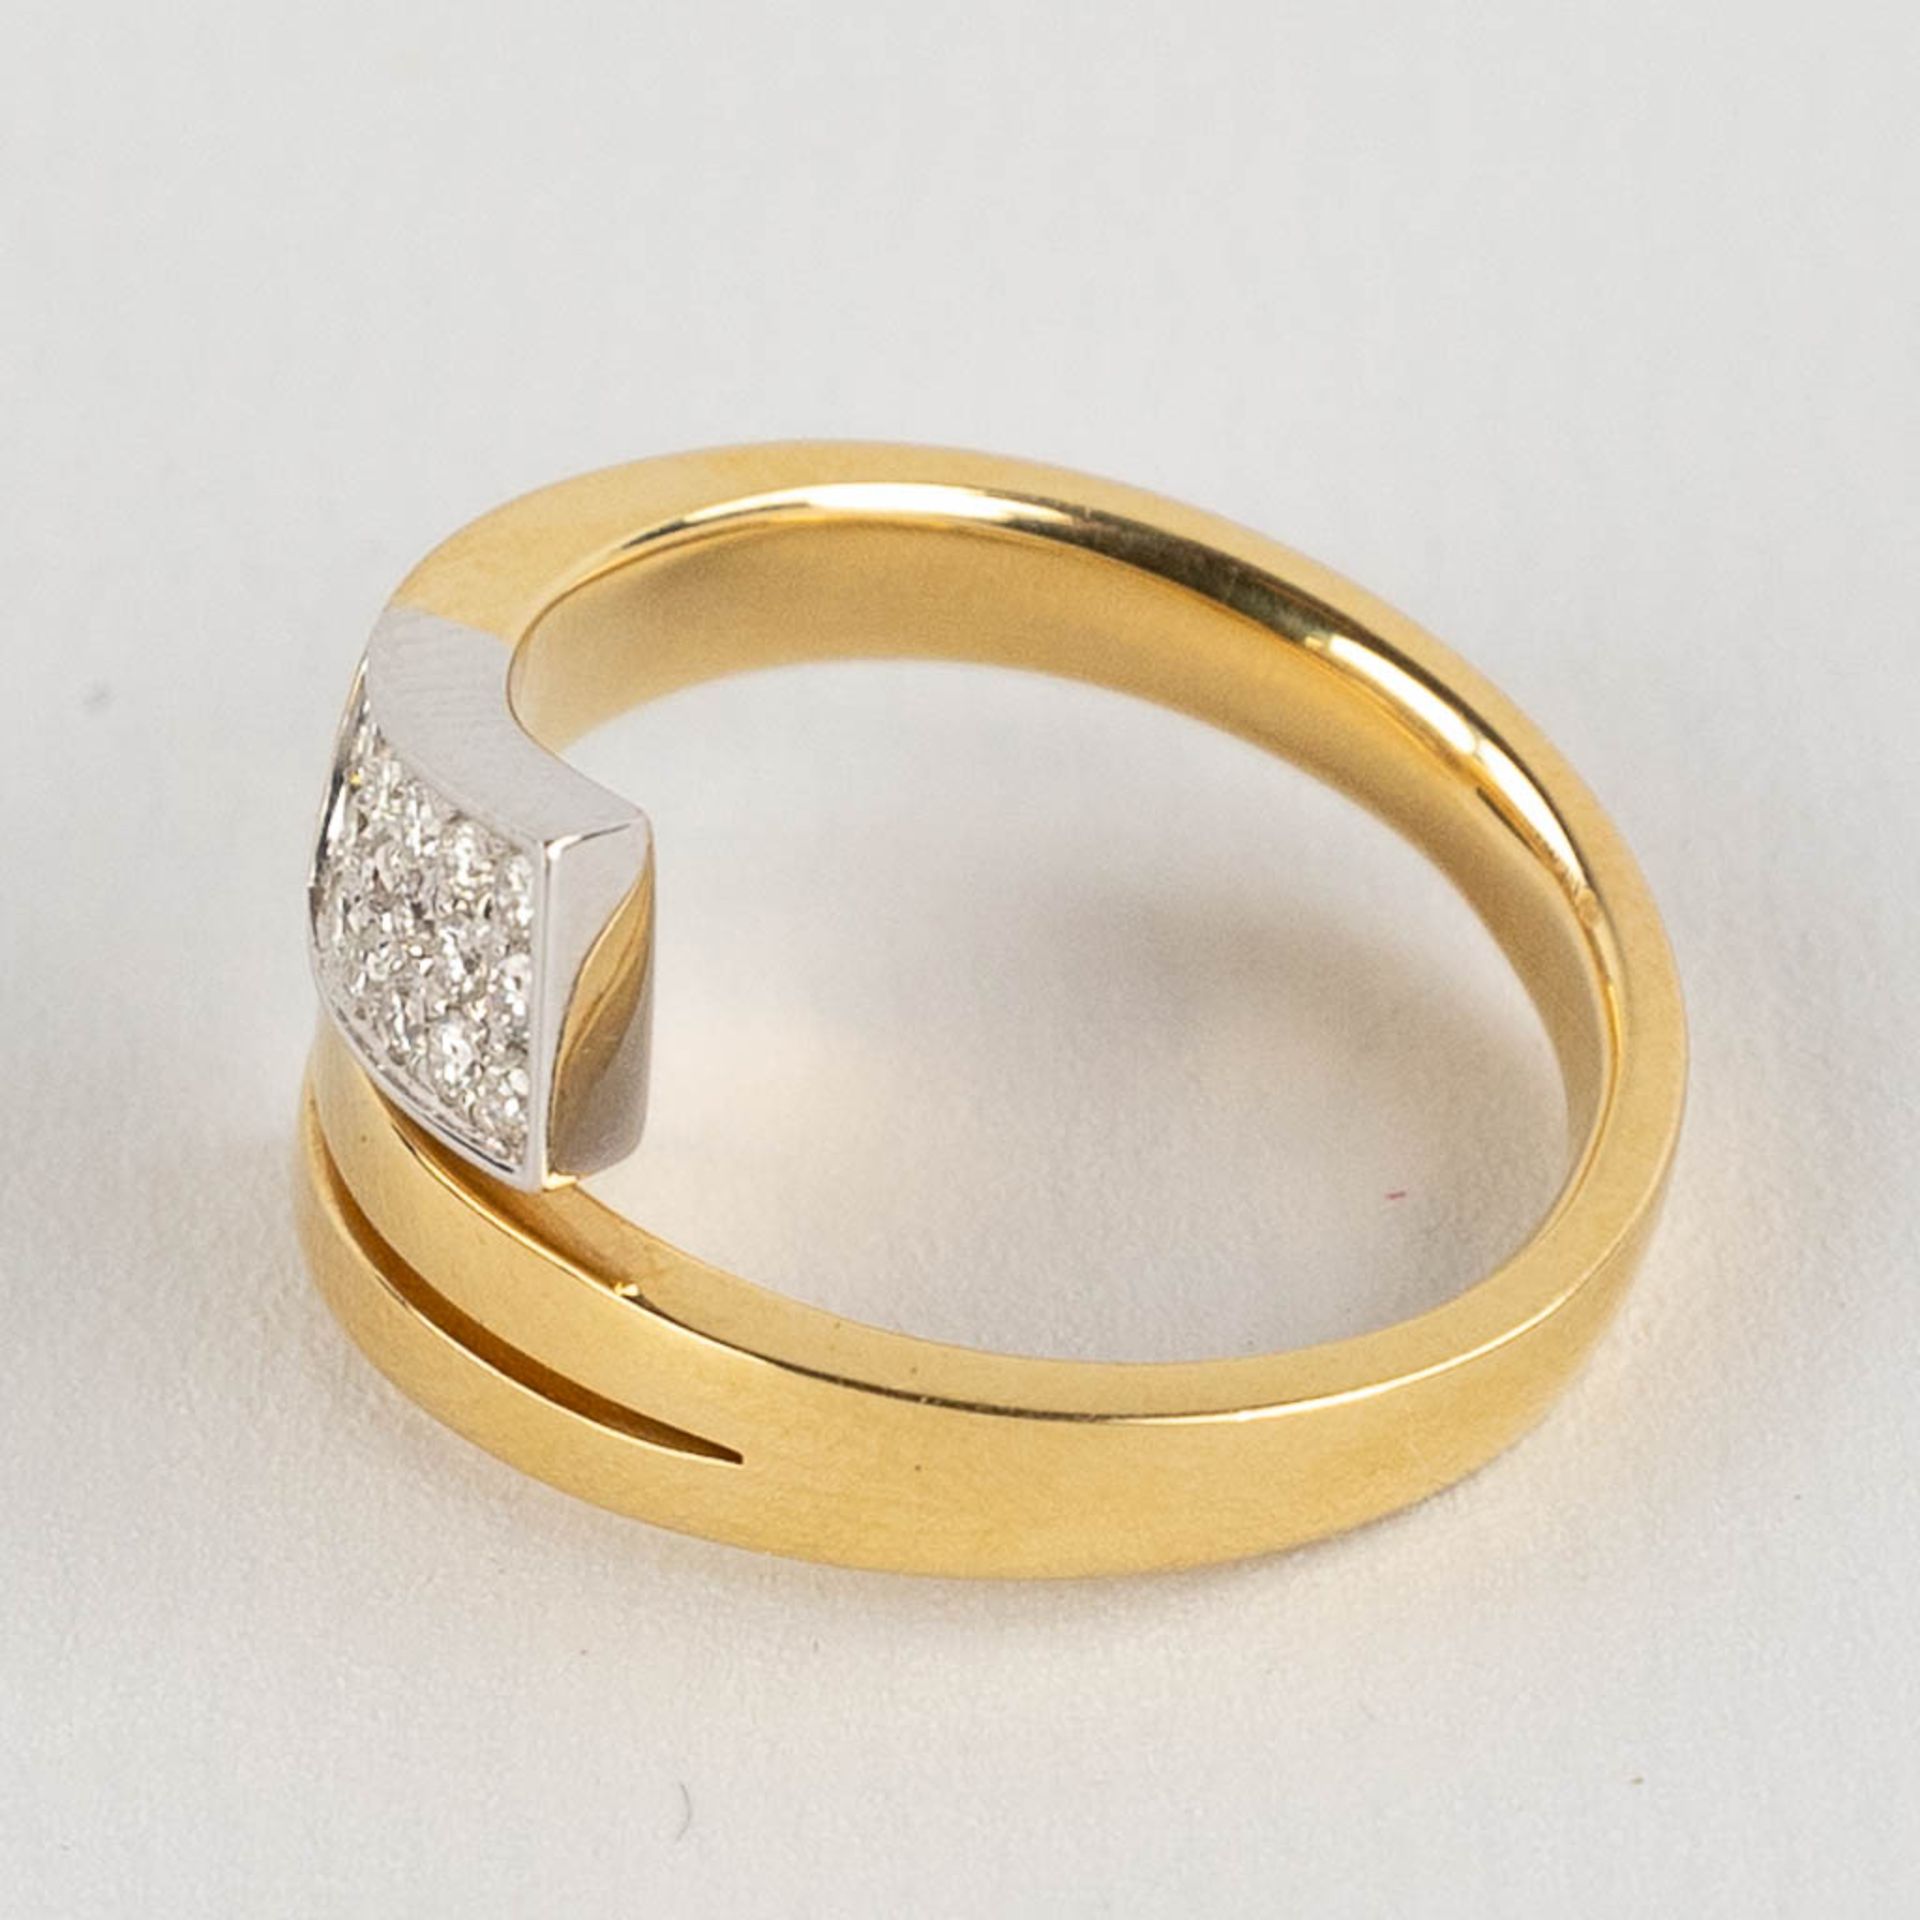 A ring, 18kt yellow gold with diamonds, appr. 0,42ct, ring size 55. - Image 4 of 11